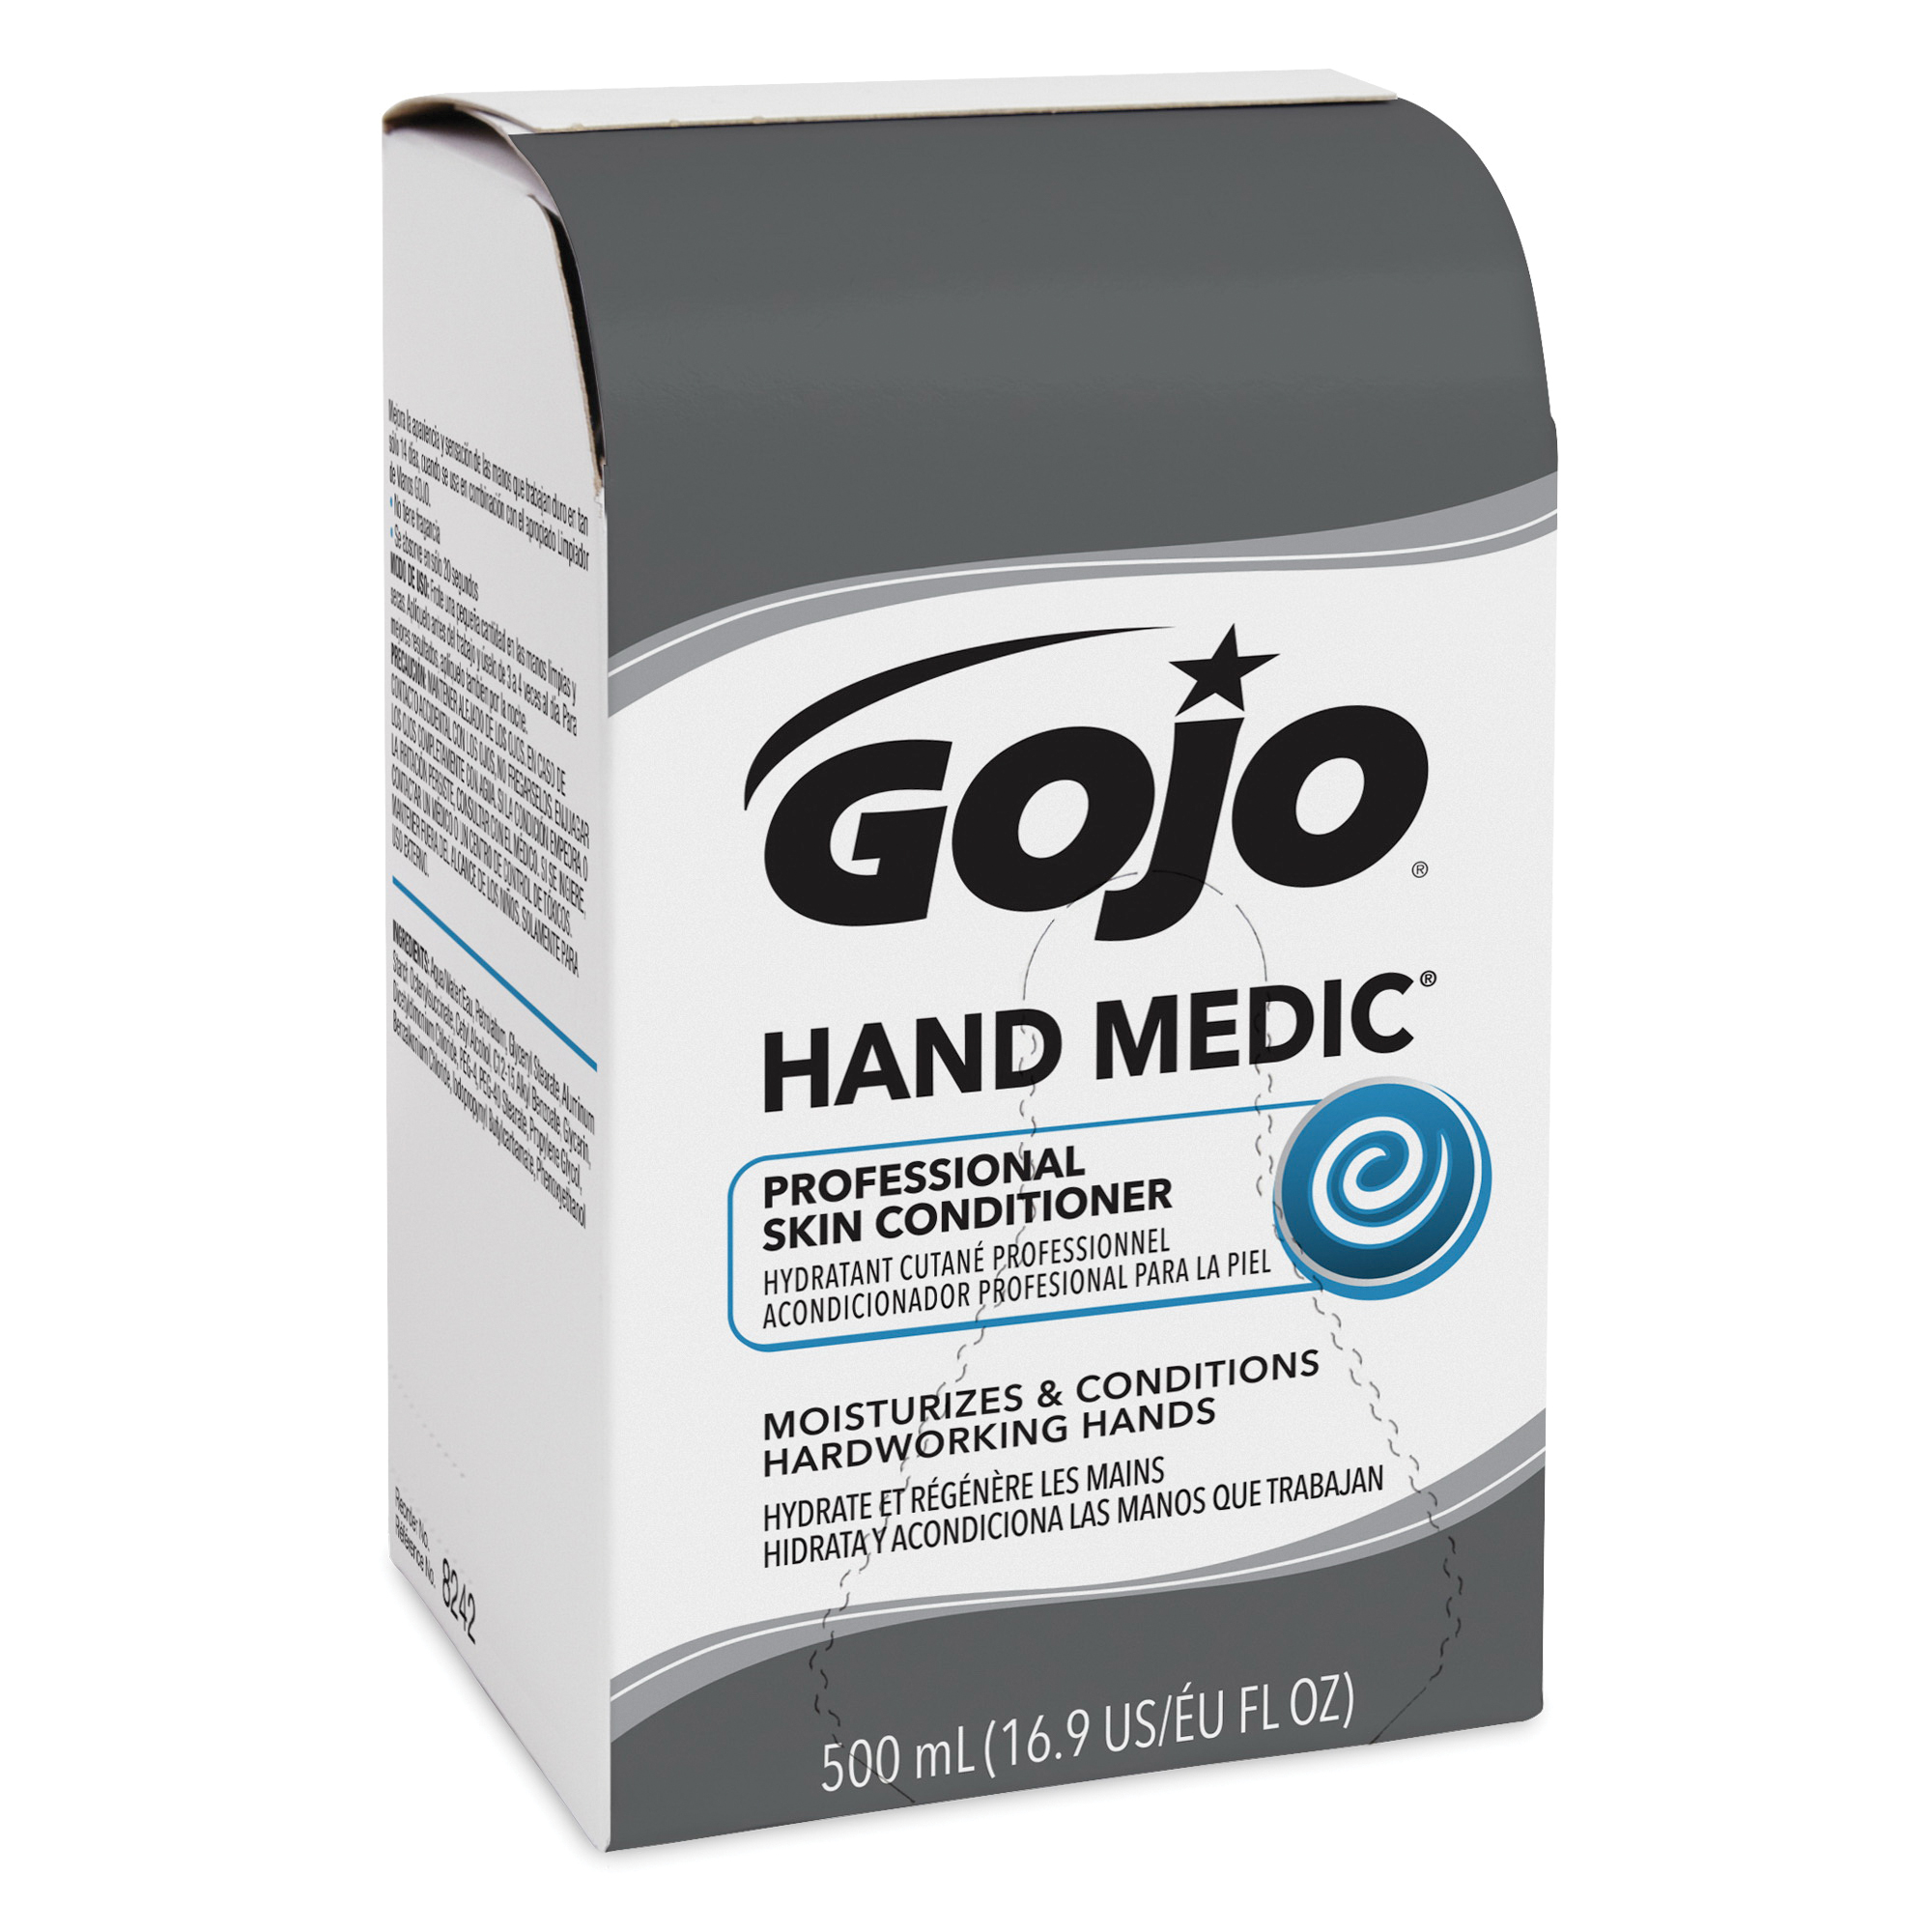 GOJO® 8242-06 Professional Skin Conditioner, 500 mL Nominal, Bag-in-Box Package, Liquid Form, Unscented Odor/Scent, Opaque/White